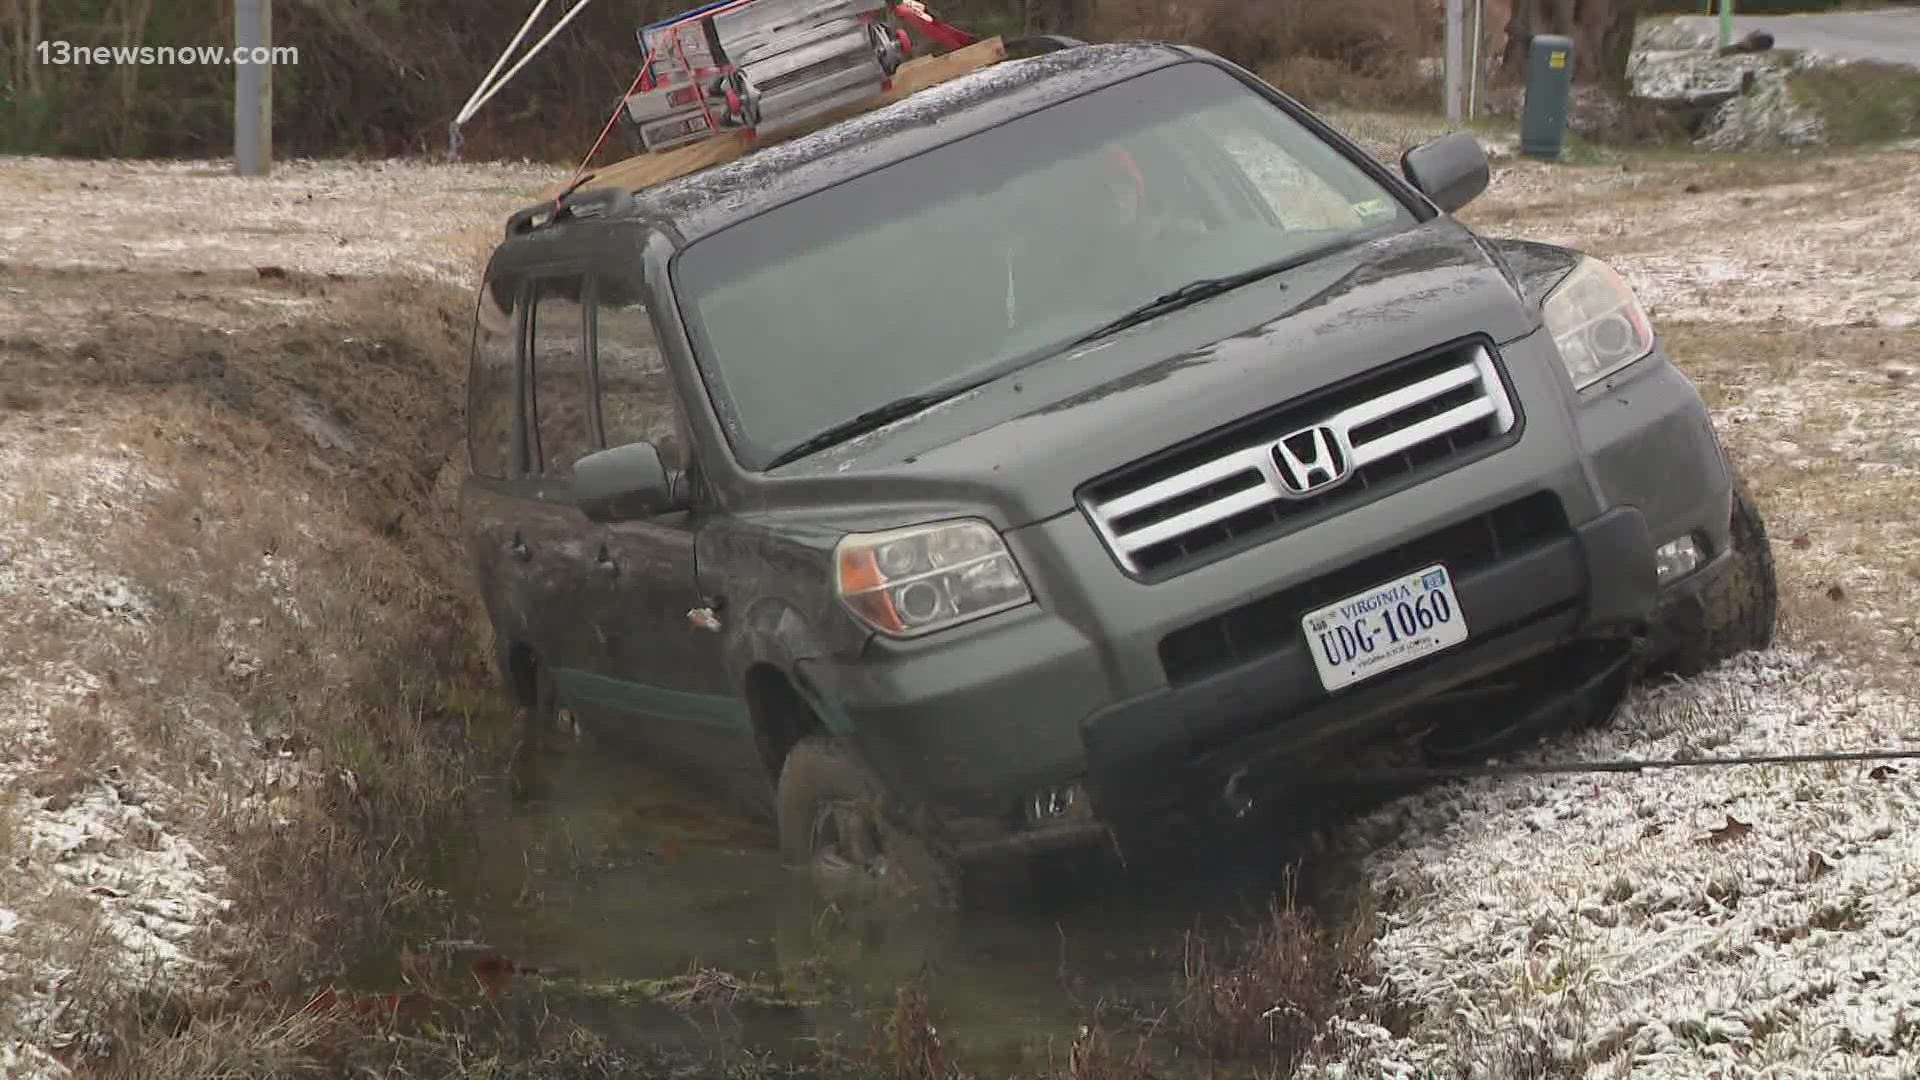 Chesapeake police said a vehicle crashed on Sanderson Road. The roadway was icy which caused this incident.